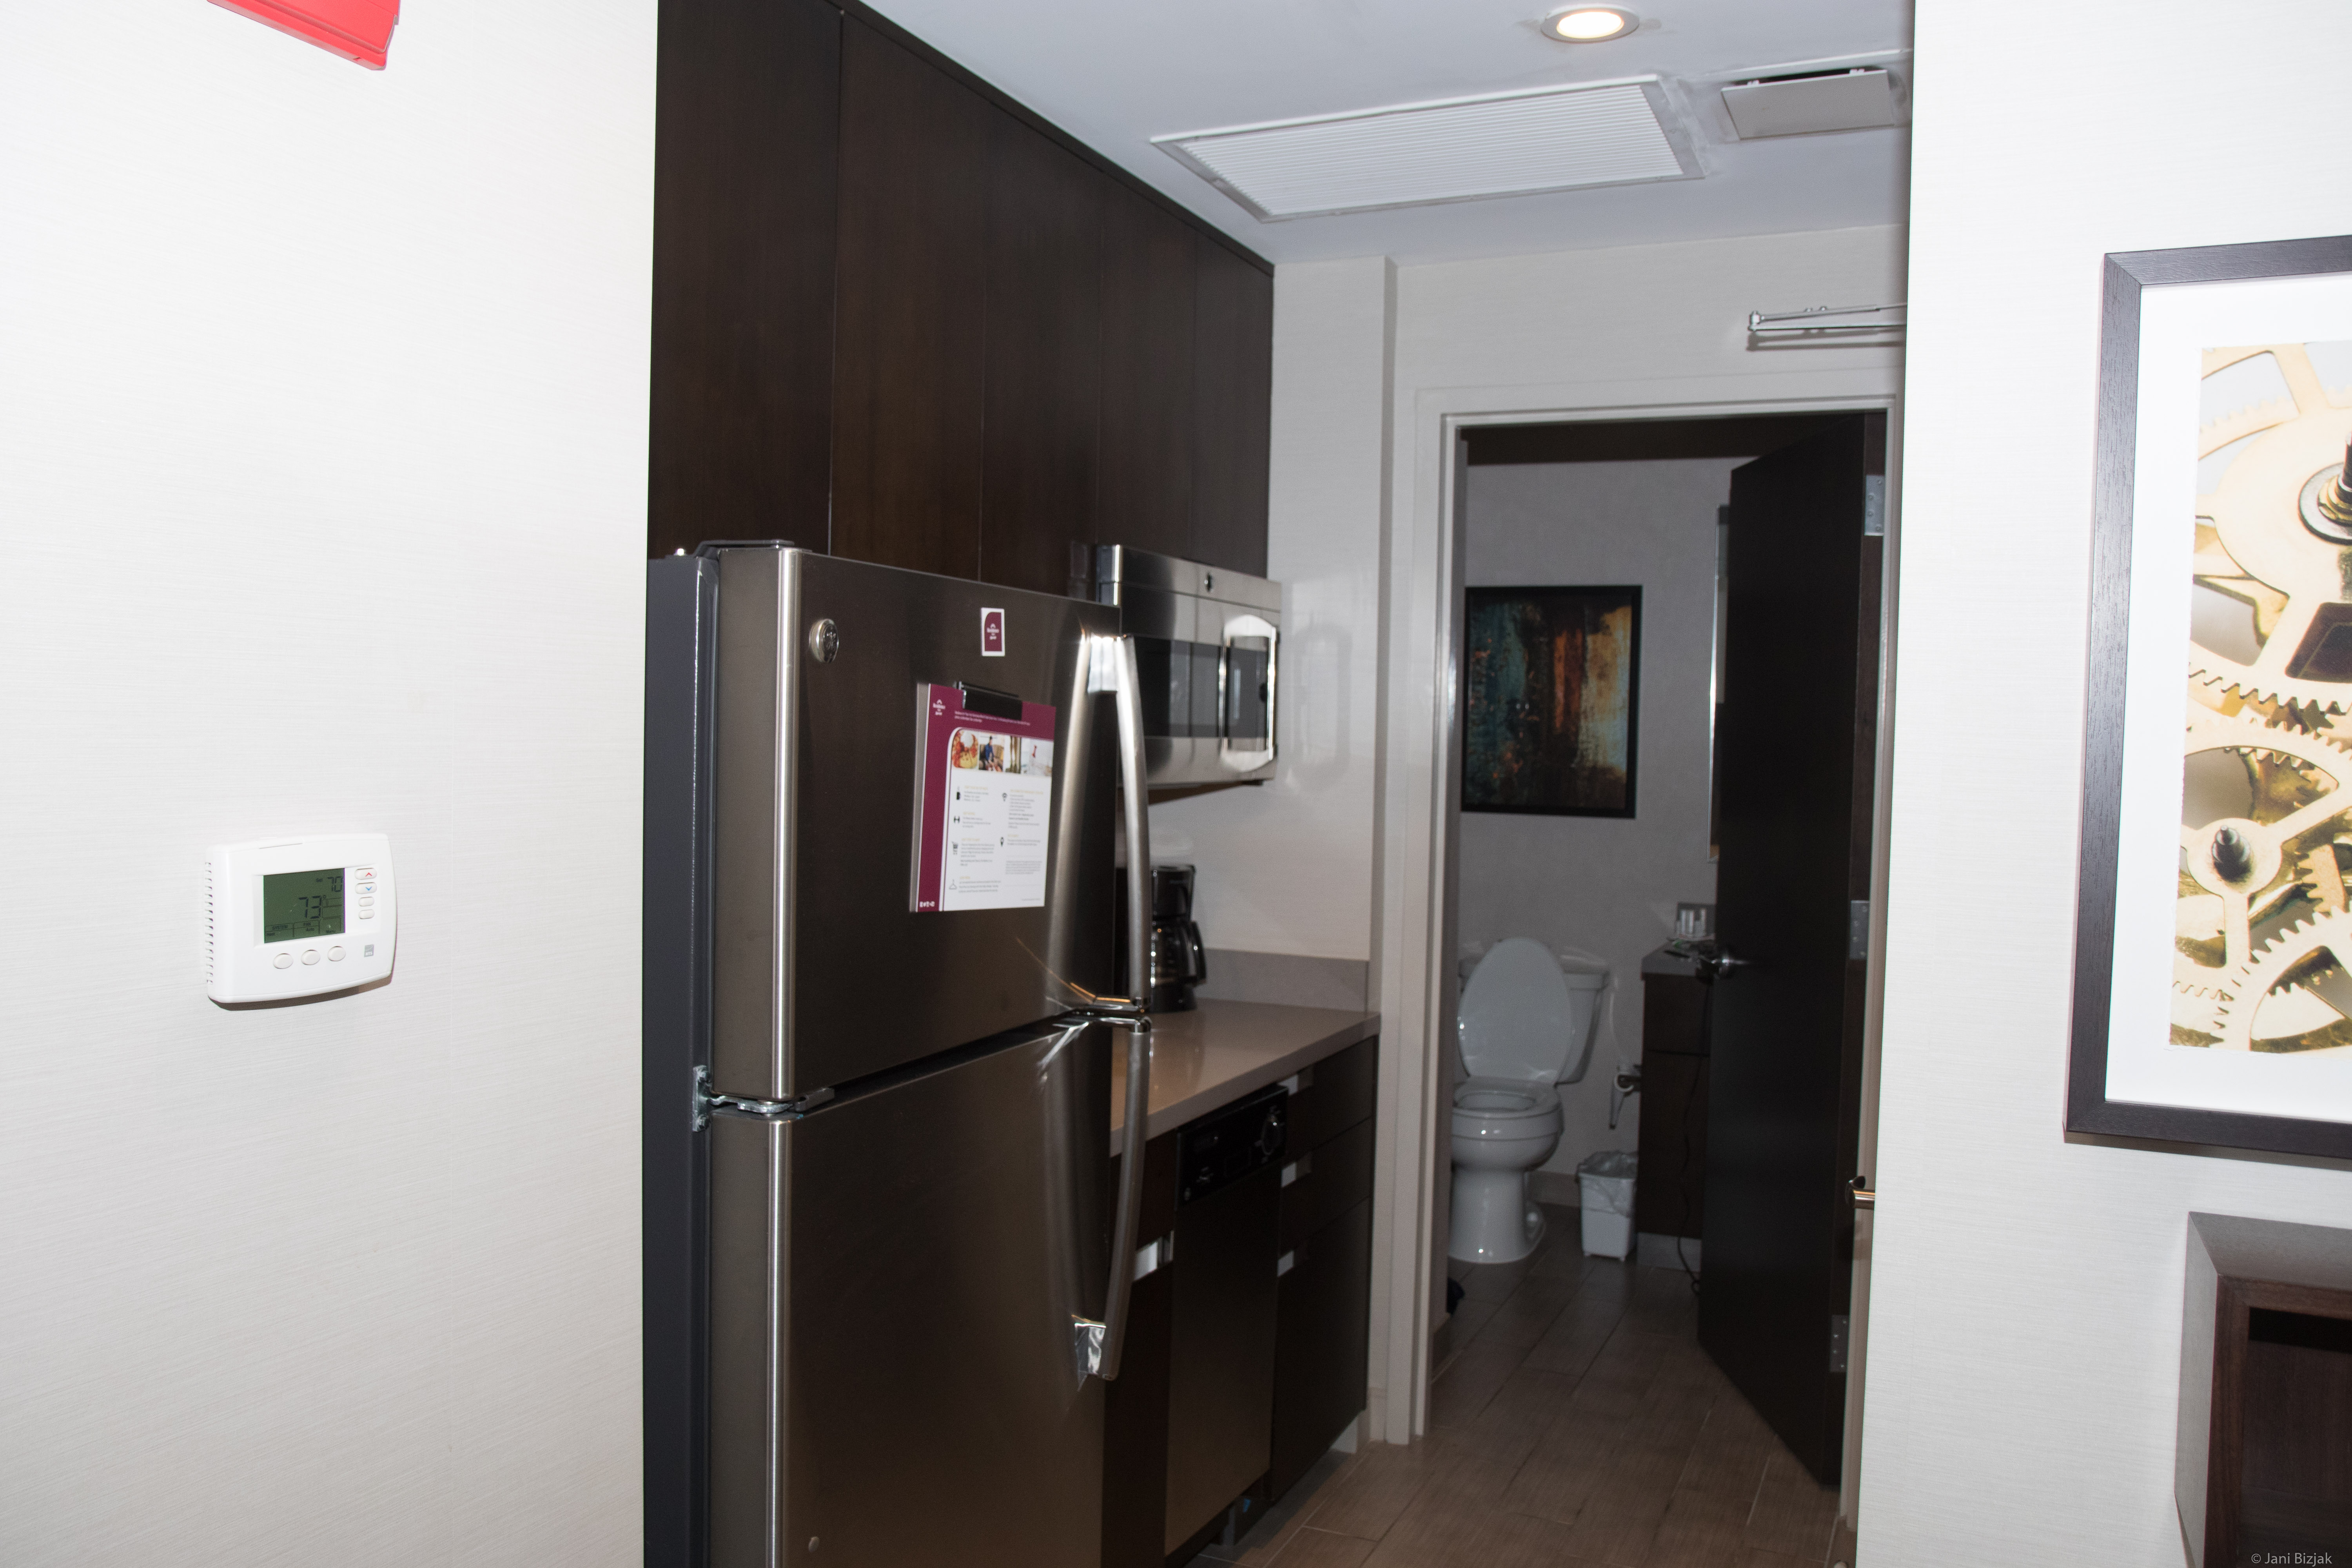 We had a mini kitchen and large bathroom with shower in the room.